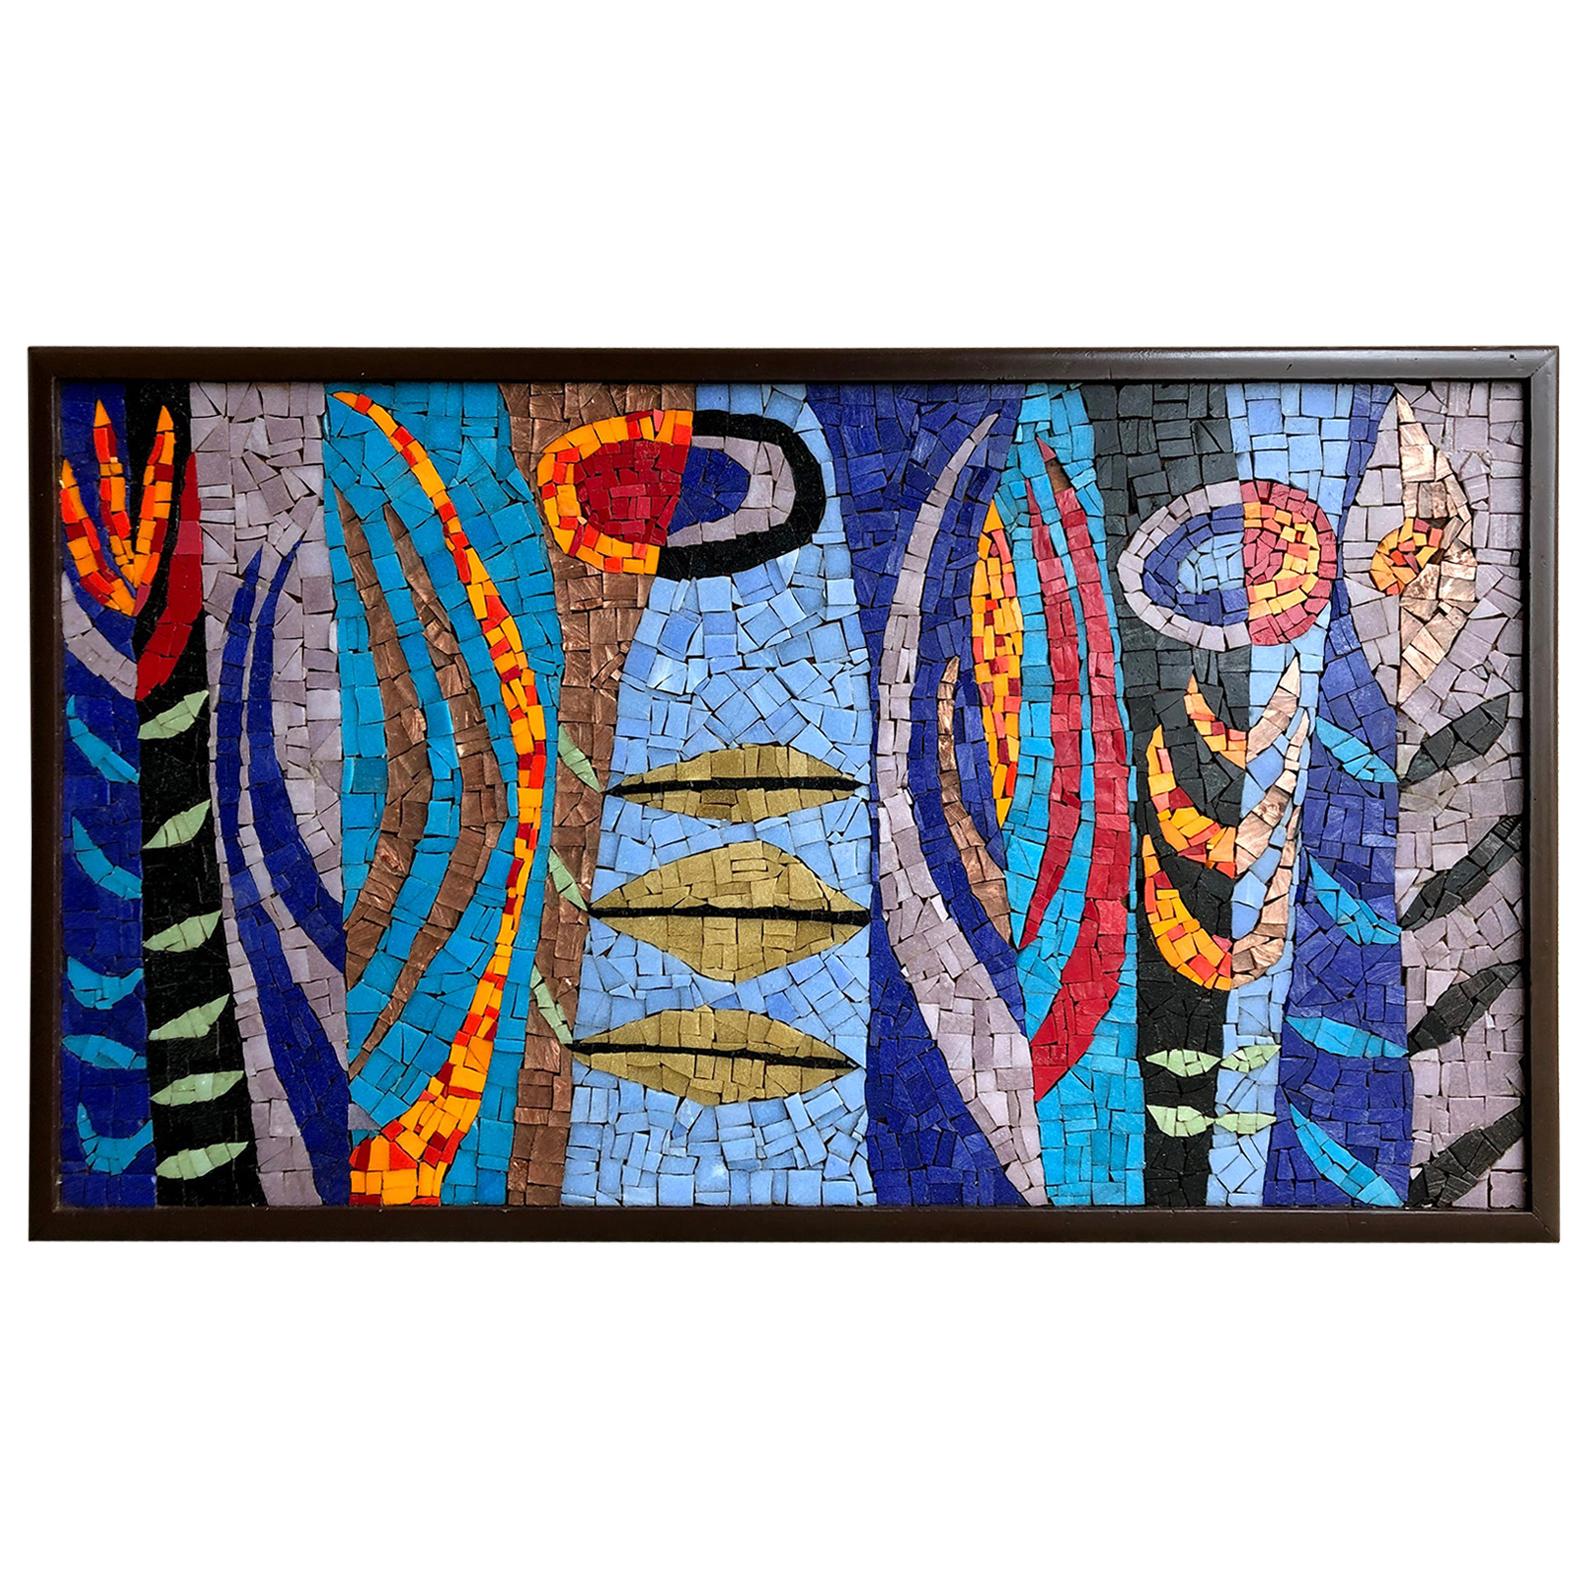 In the Garden Glass Mosaic Tile Wall Panel Hanging